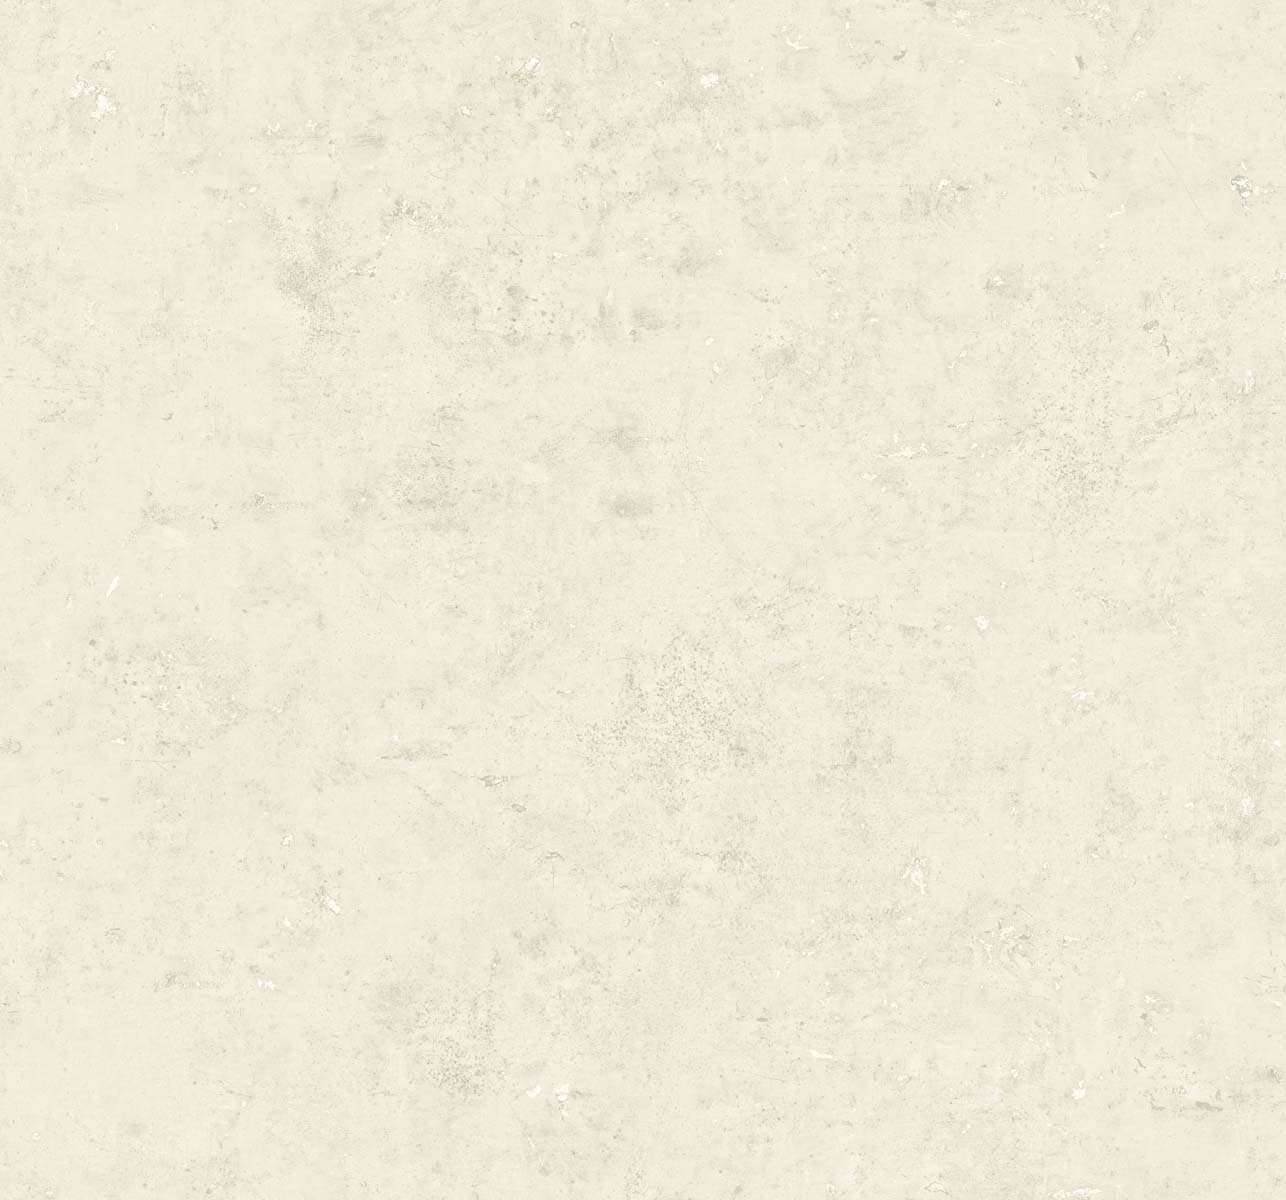 Seabrook Designs TS81215 Even More Textures Cement Faux  Wallpaper Oyster & Metallic Champagne